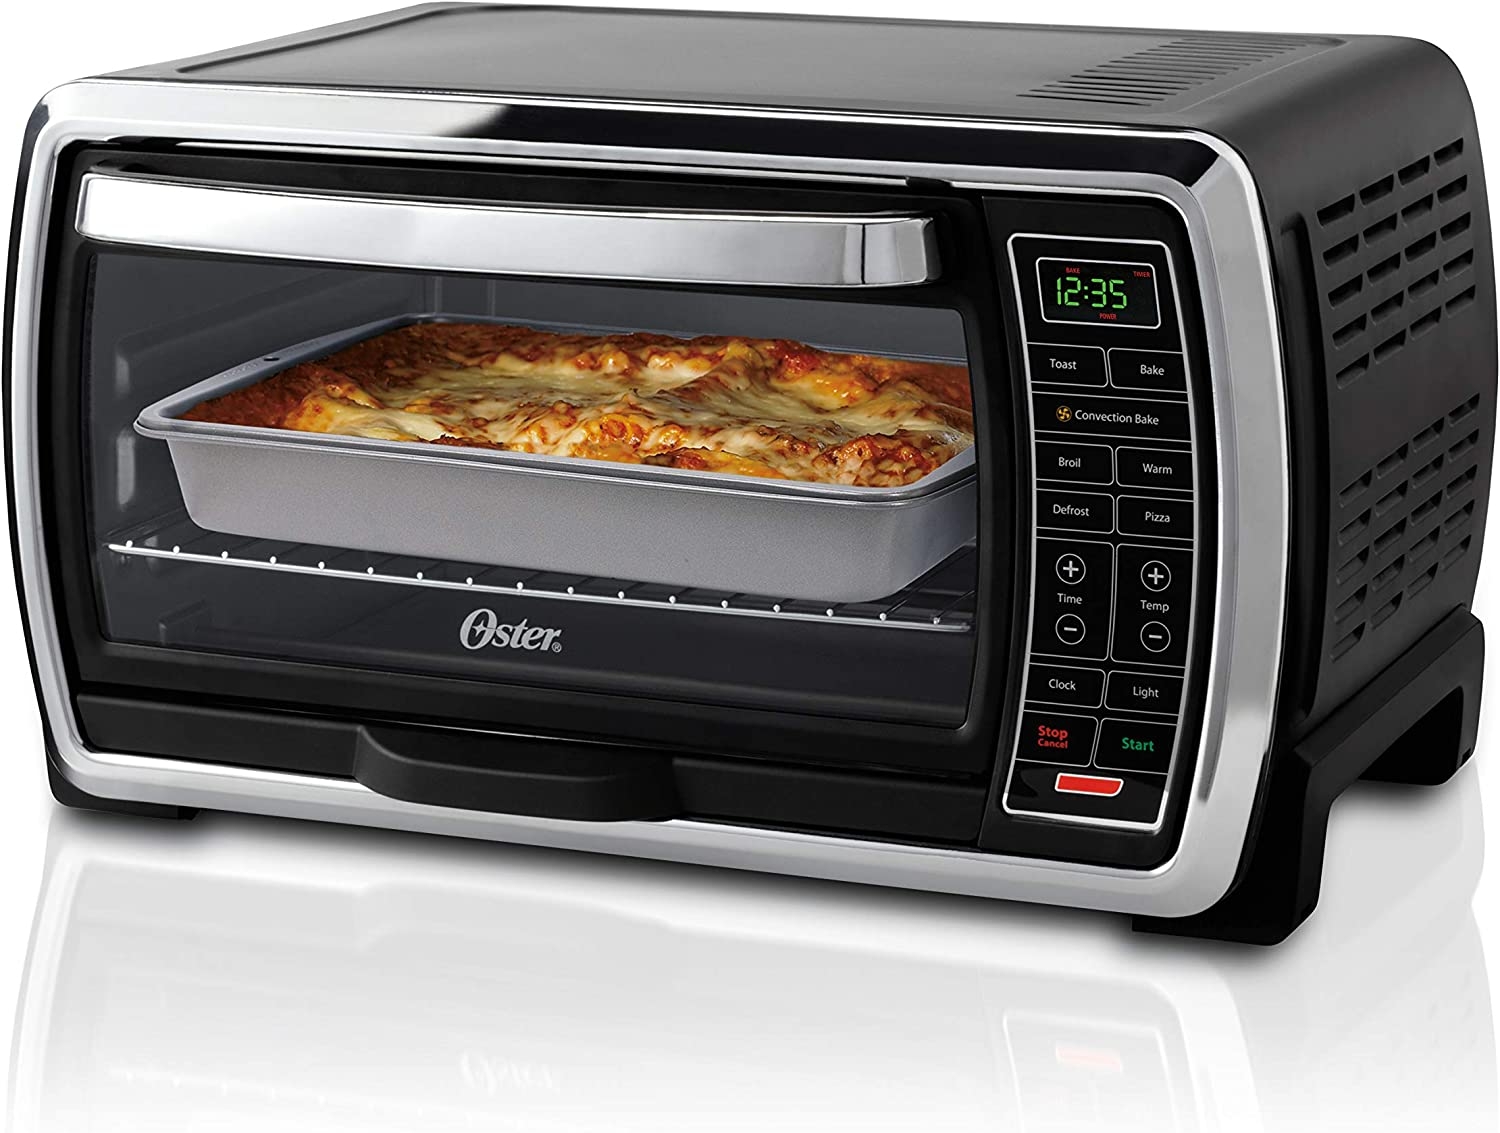 Oster Toaster Oven | Digital Convection Oven, Large 6-Slice Capacity, Black/Polished Stainless Import To Shop ×Product